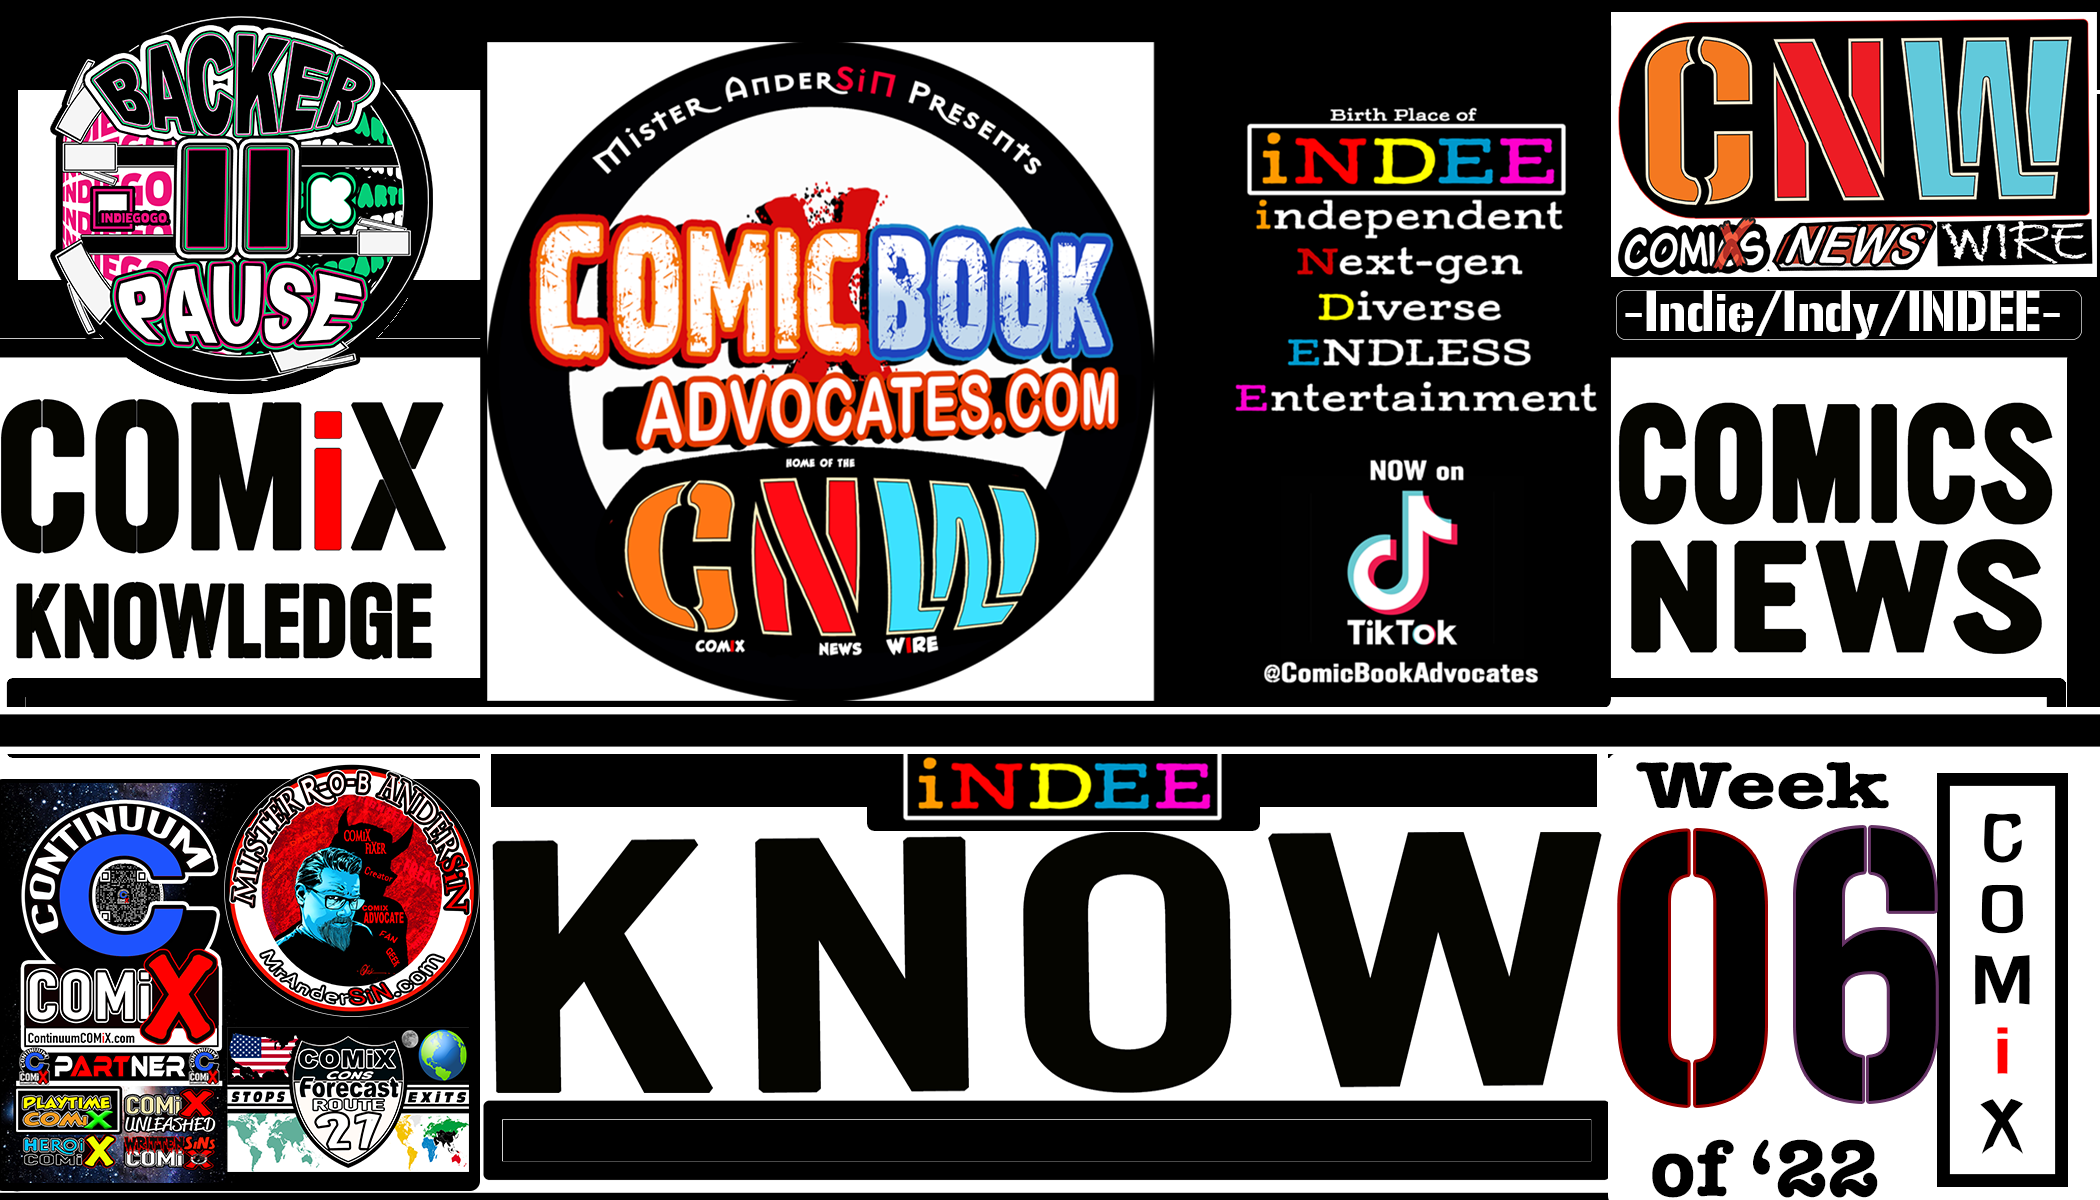 The INDEE NEWS WiRE-Week 6 of 2022 -Date  Feb 7th-13th of 2022 – THE COMiX NEWS WiRE.